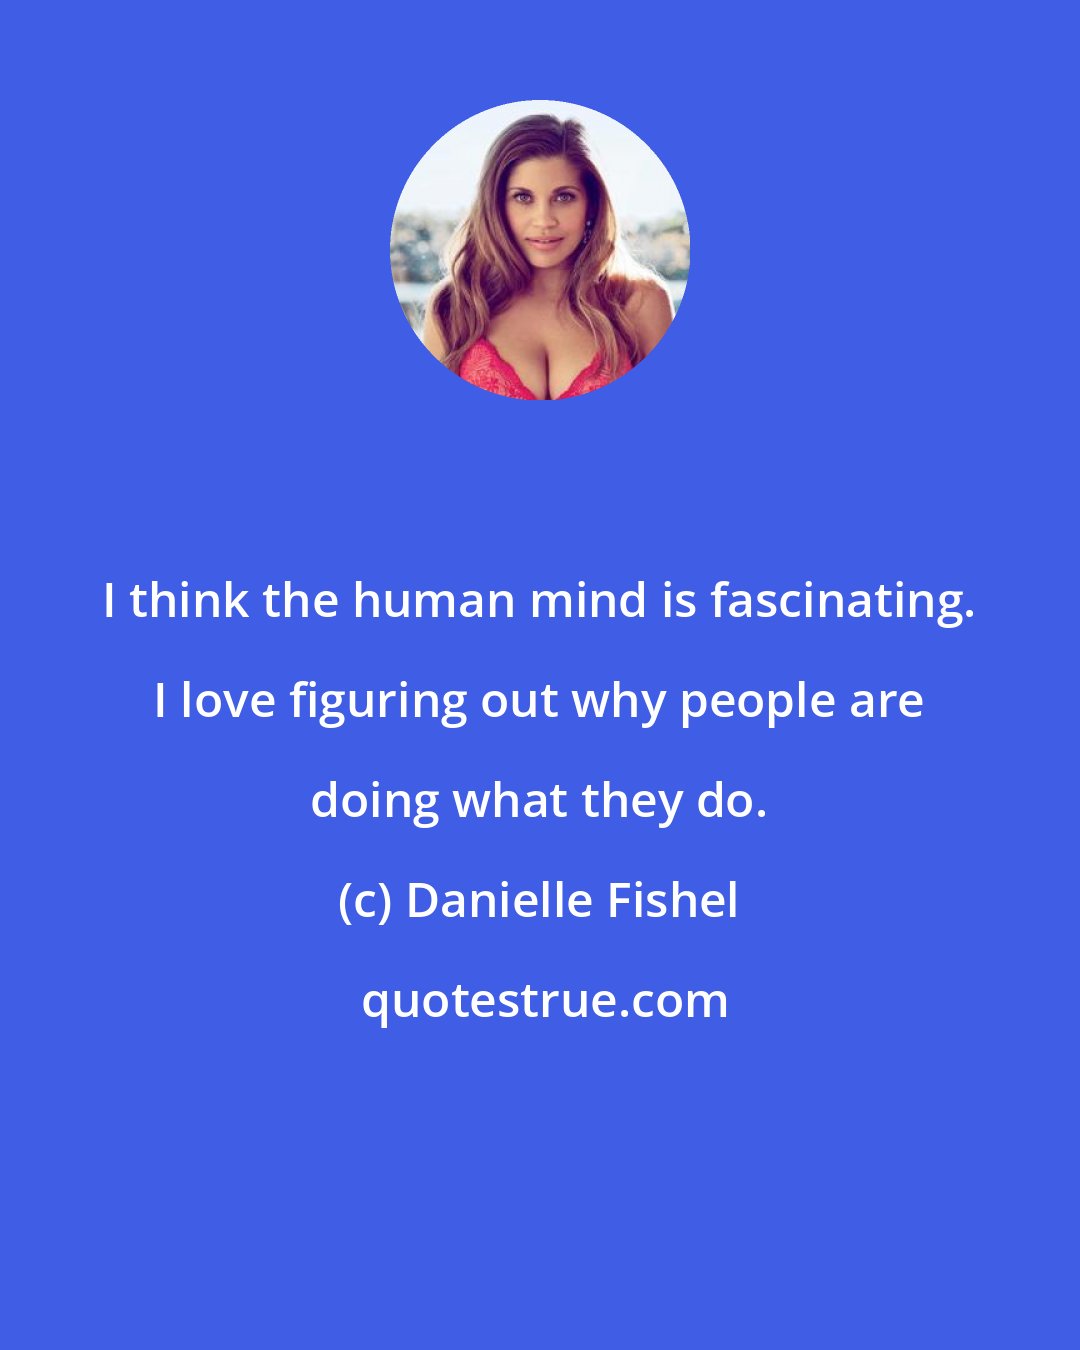 Danielle Fishel: I think the human mind is fascinating. I love figuring out why people are doing what they do.